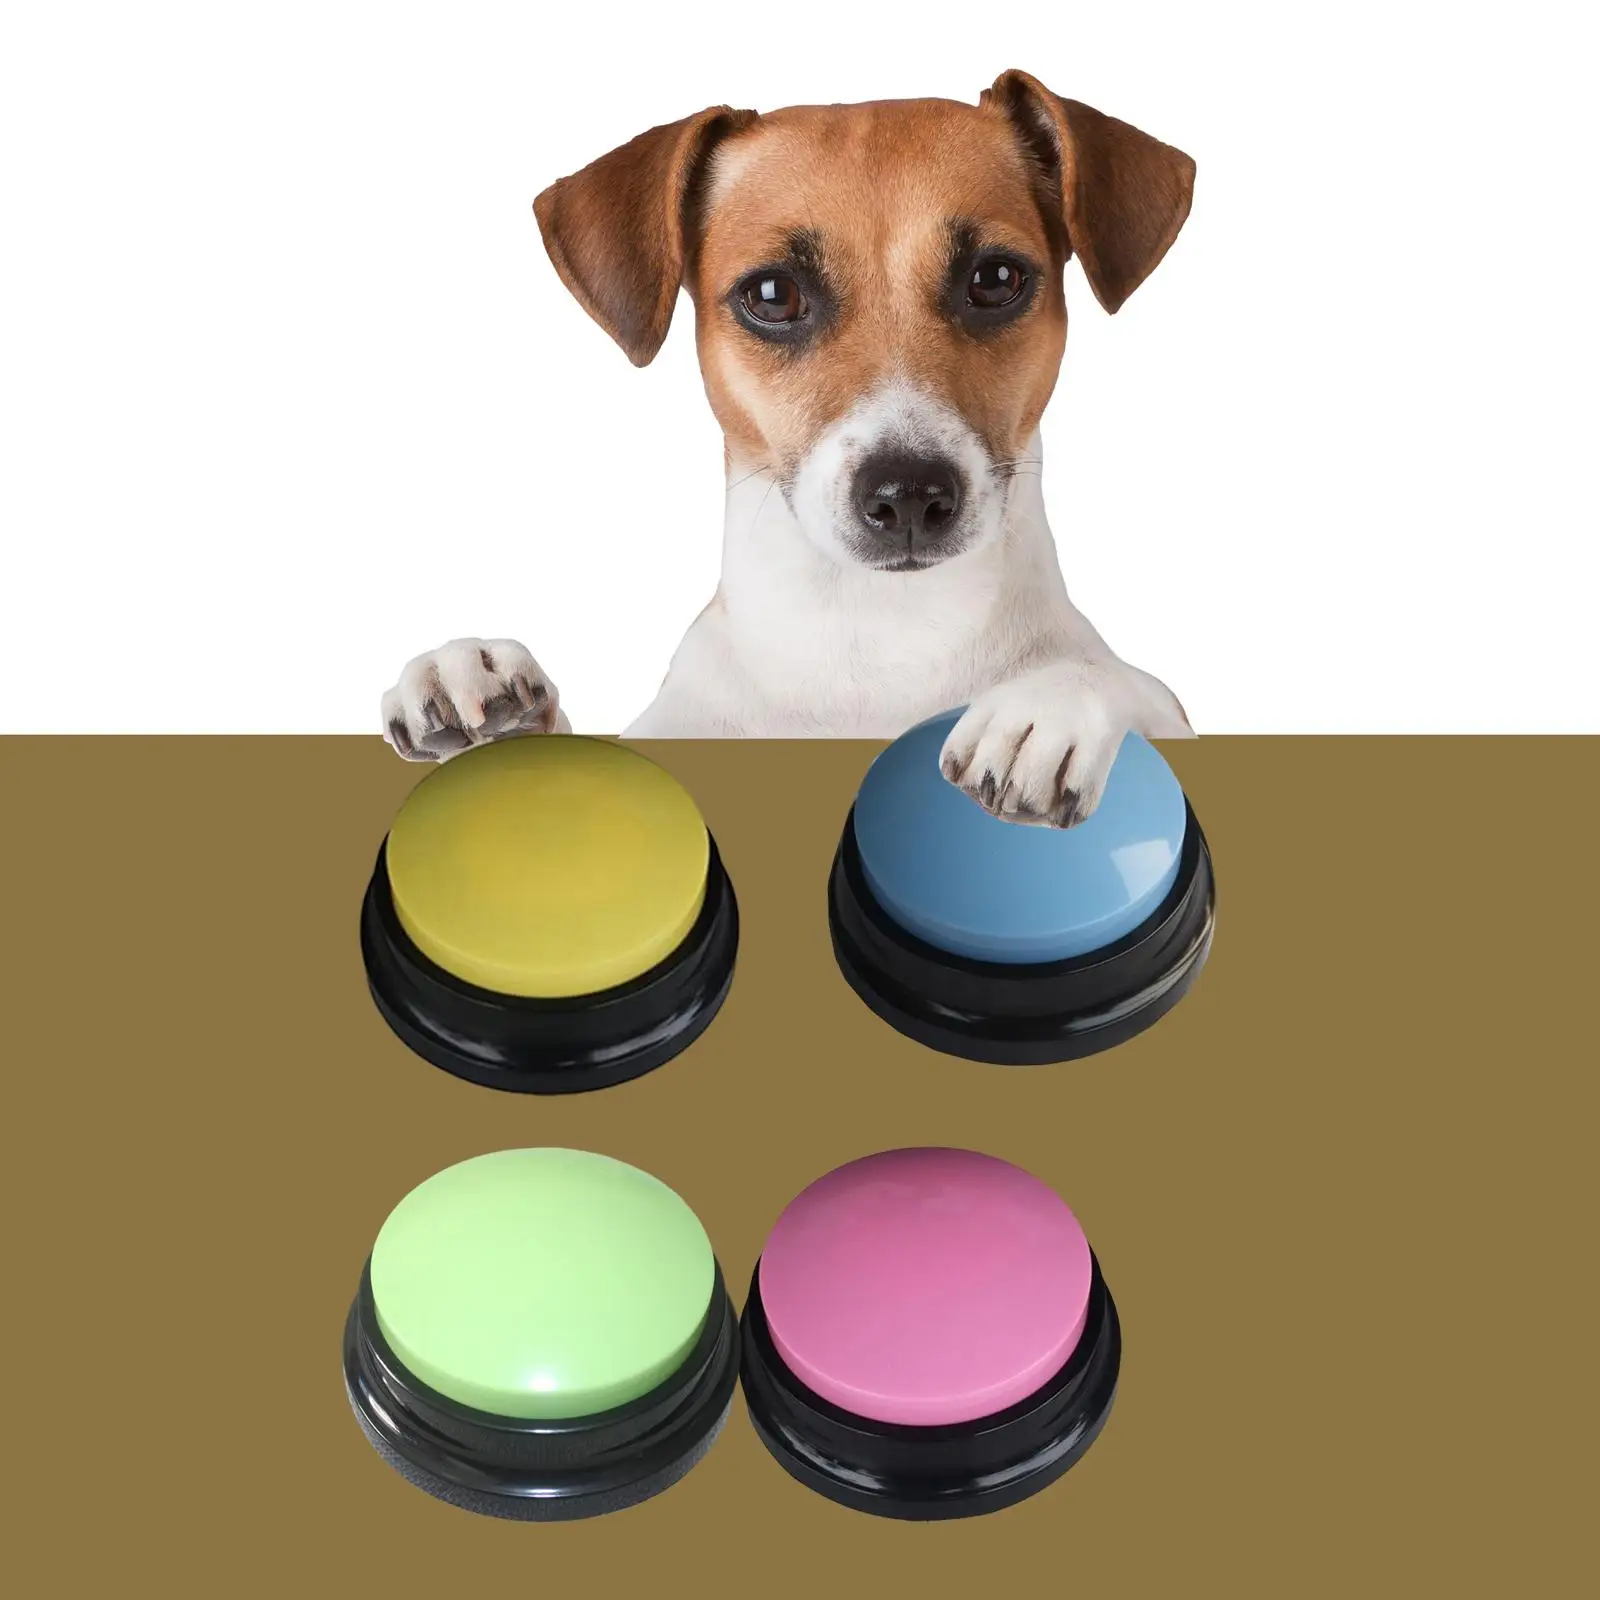 4x Recordable Dog Interactive Training Educational Toys Squeaks Voice Recording Button for Dogs Cats Kids